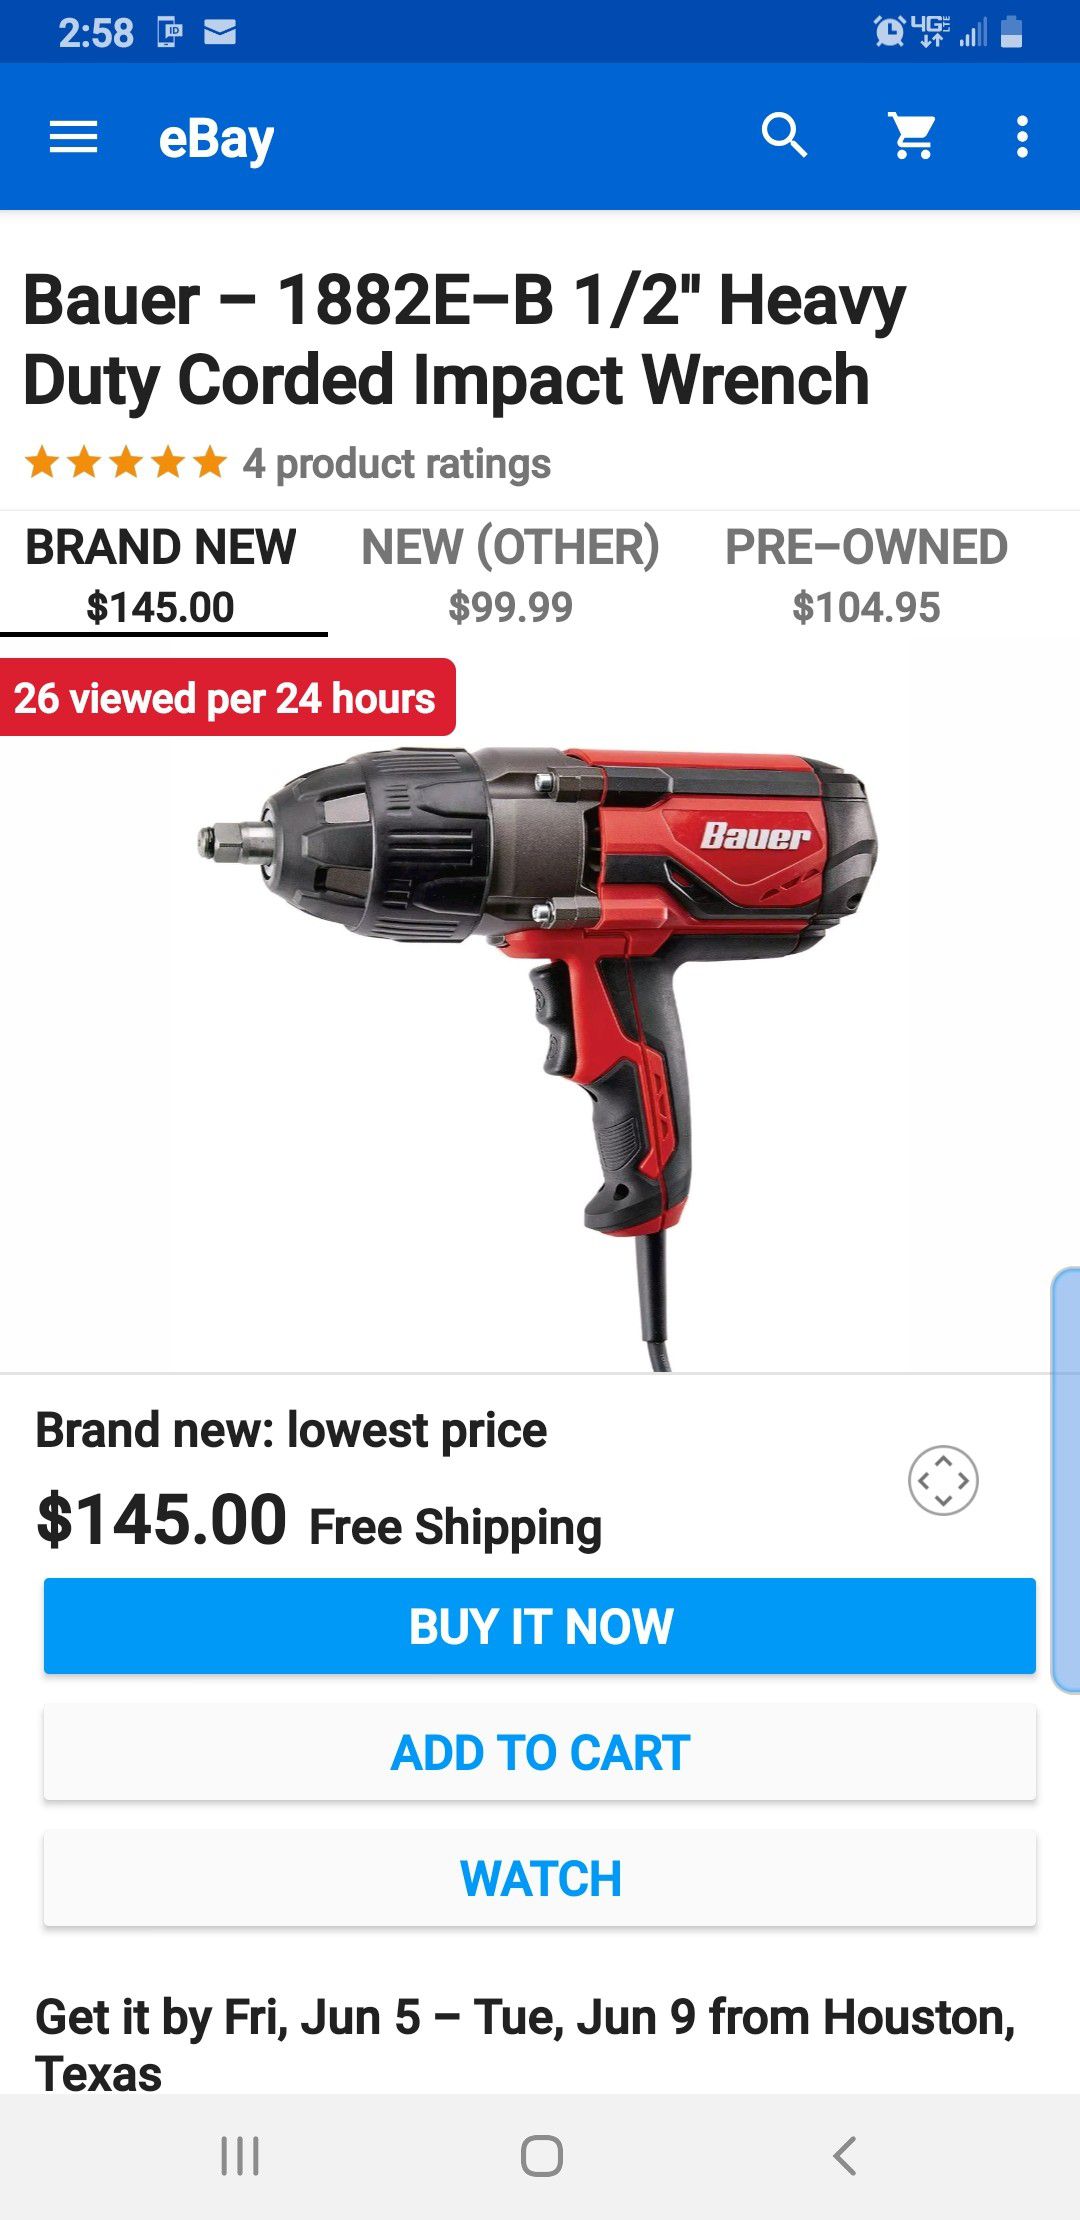 Bauer corded impact wrench